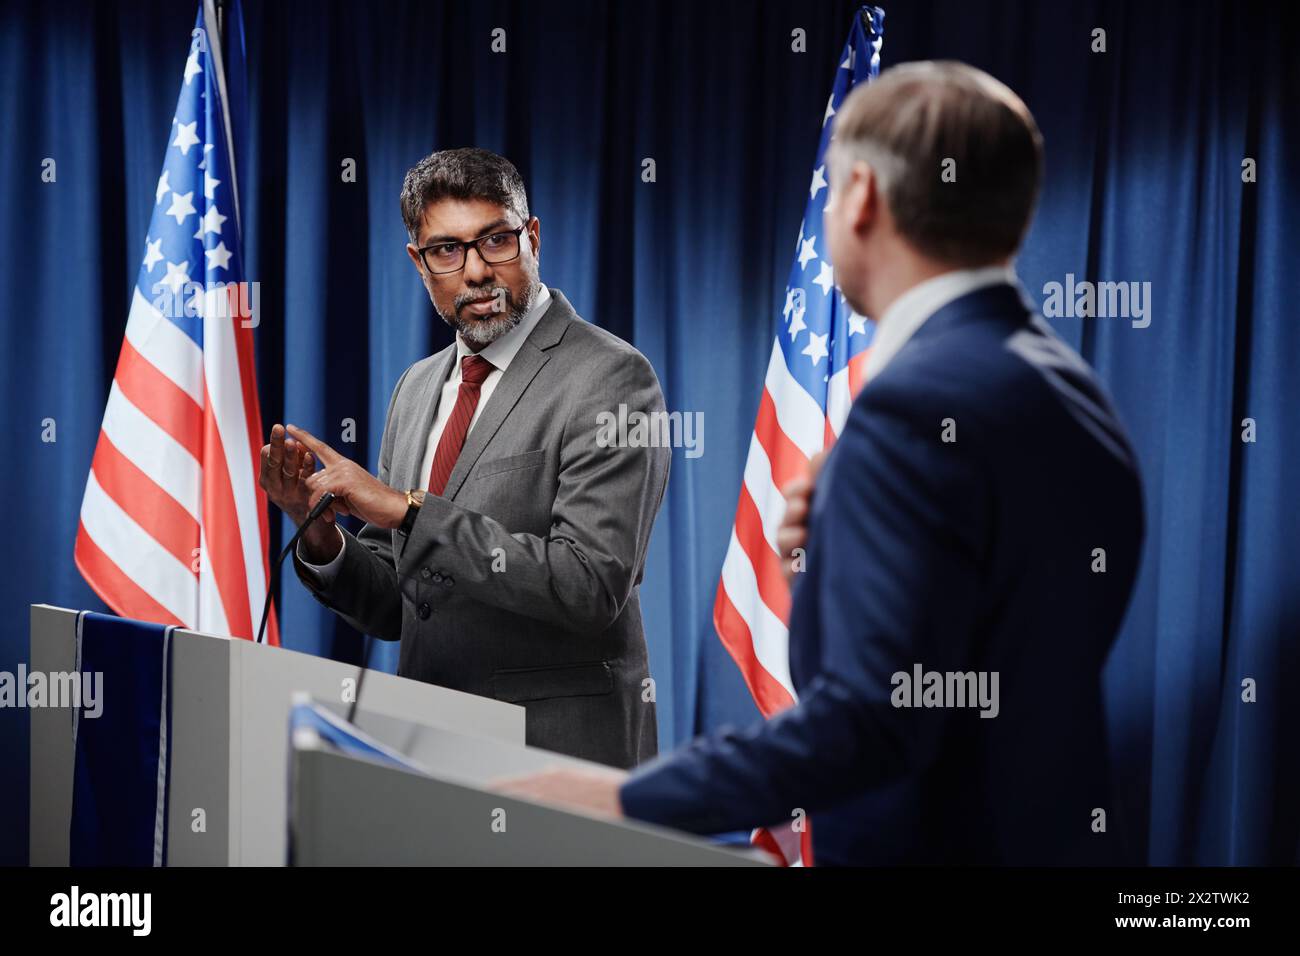 Confident mature multiethnic male political leader enumerating new points in developing economics and foreign policy at press conference Stock Photo